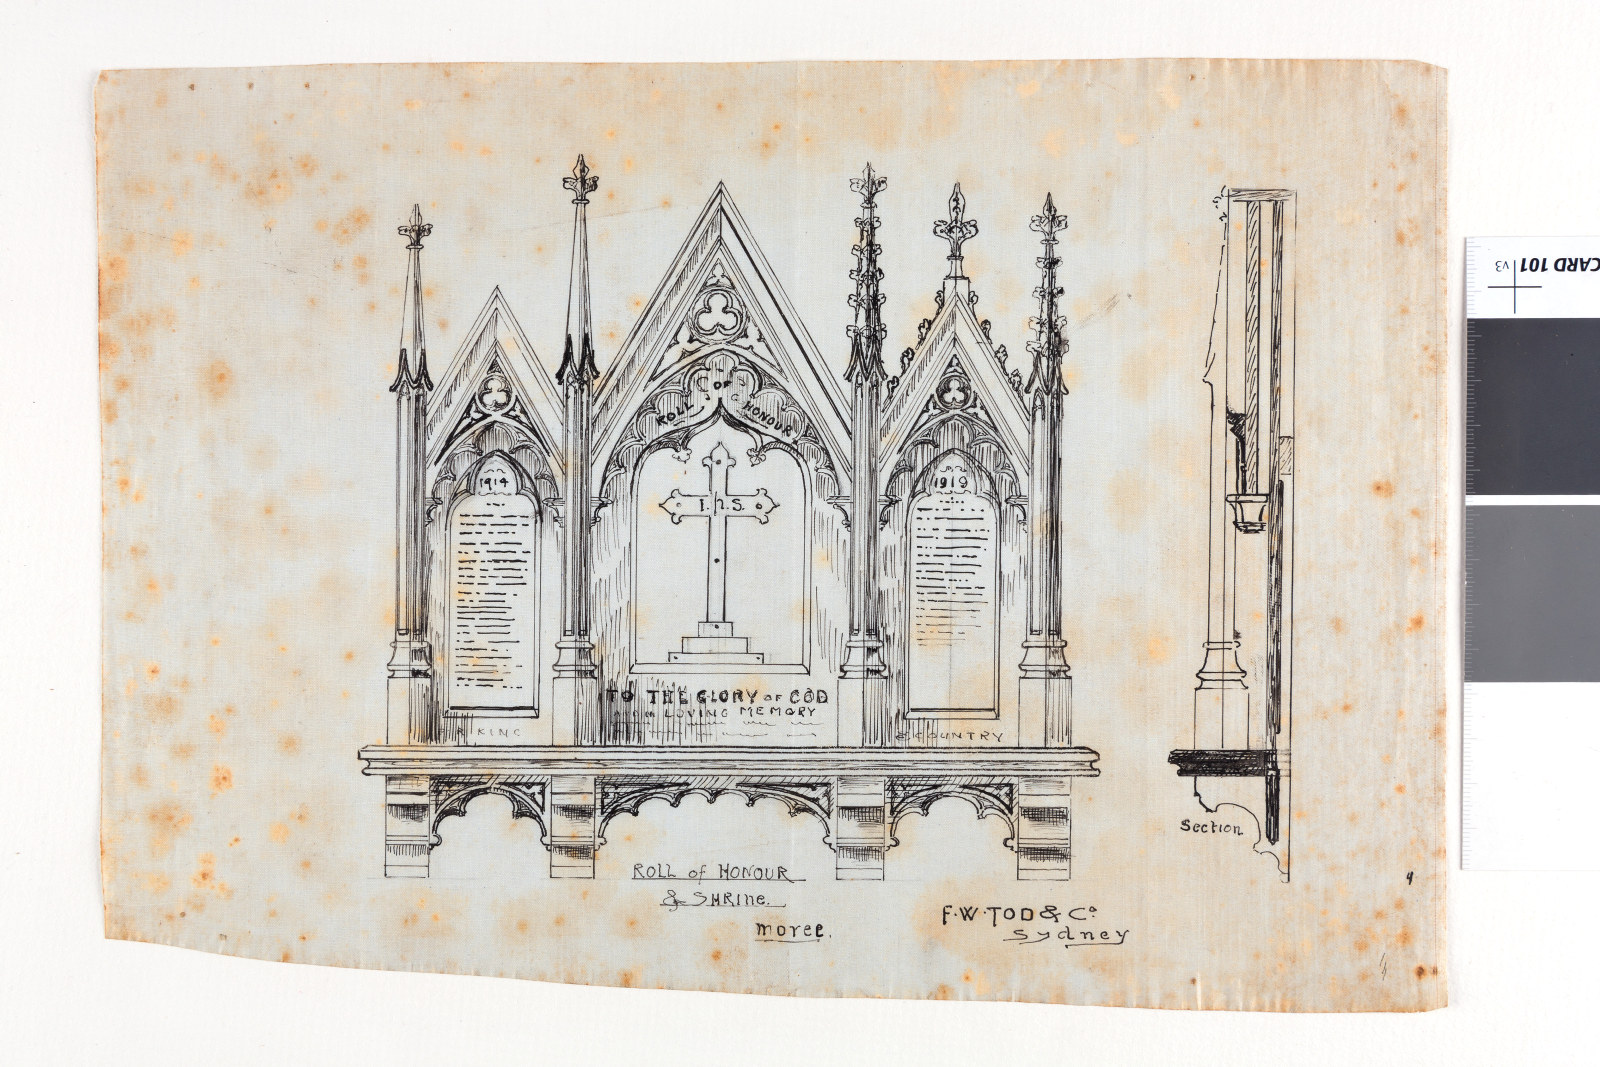 Archive of design drawings for ecclesiastical furniture : fonts, font covers, lecterns, honour rolls, chancel chairs, clergy seats, Glastonbury chairs, Presbyterian chairs, elders chairs, sanctuary or minister's chairs, clergy stalls, Bishop's stalls, memorial stalls, altar candlesticks / F. W. Tod & Co., designers & ecclesiastical craftsmen